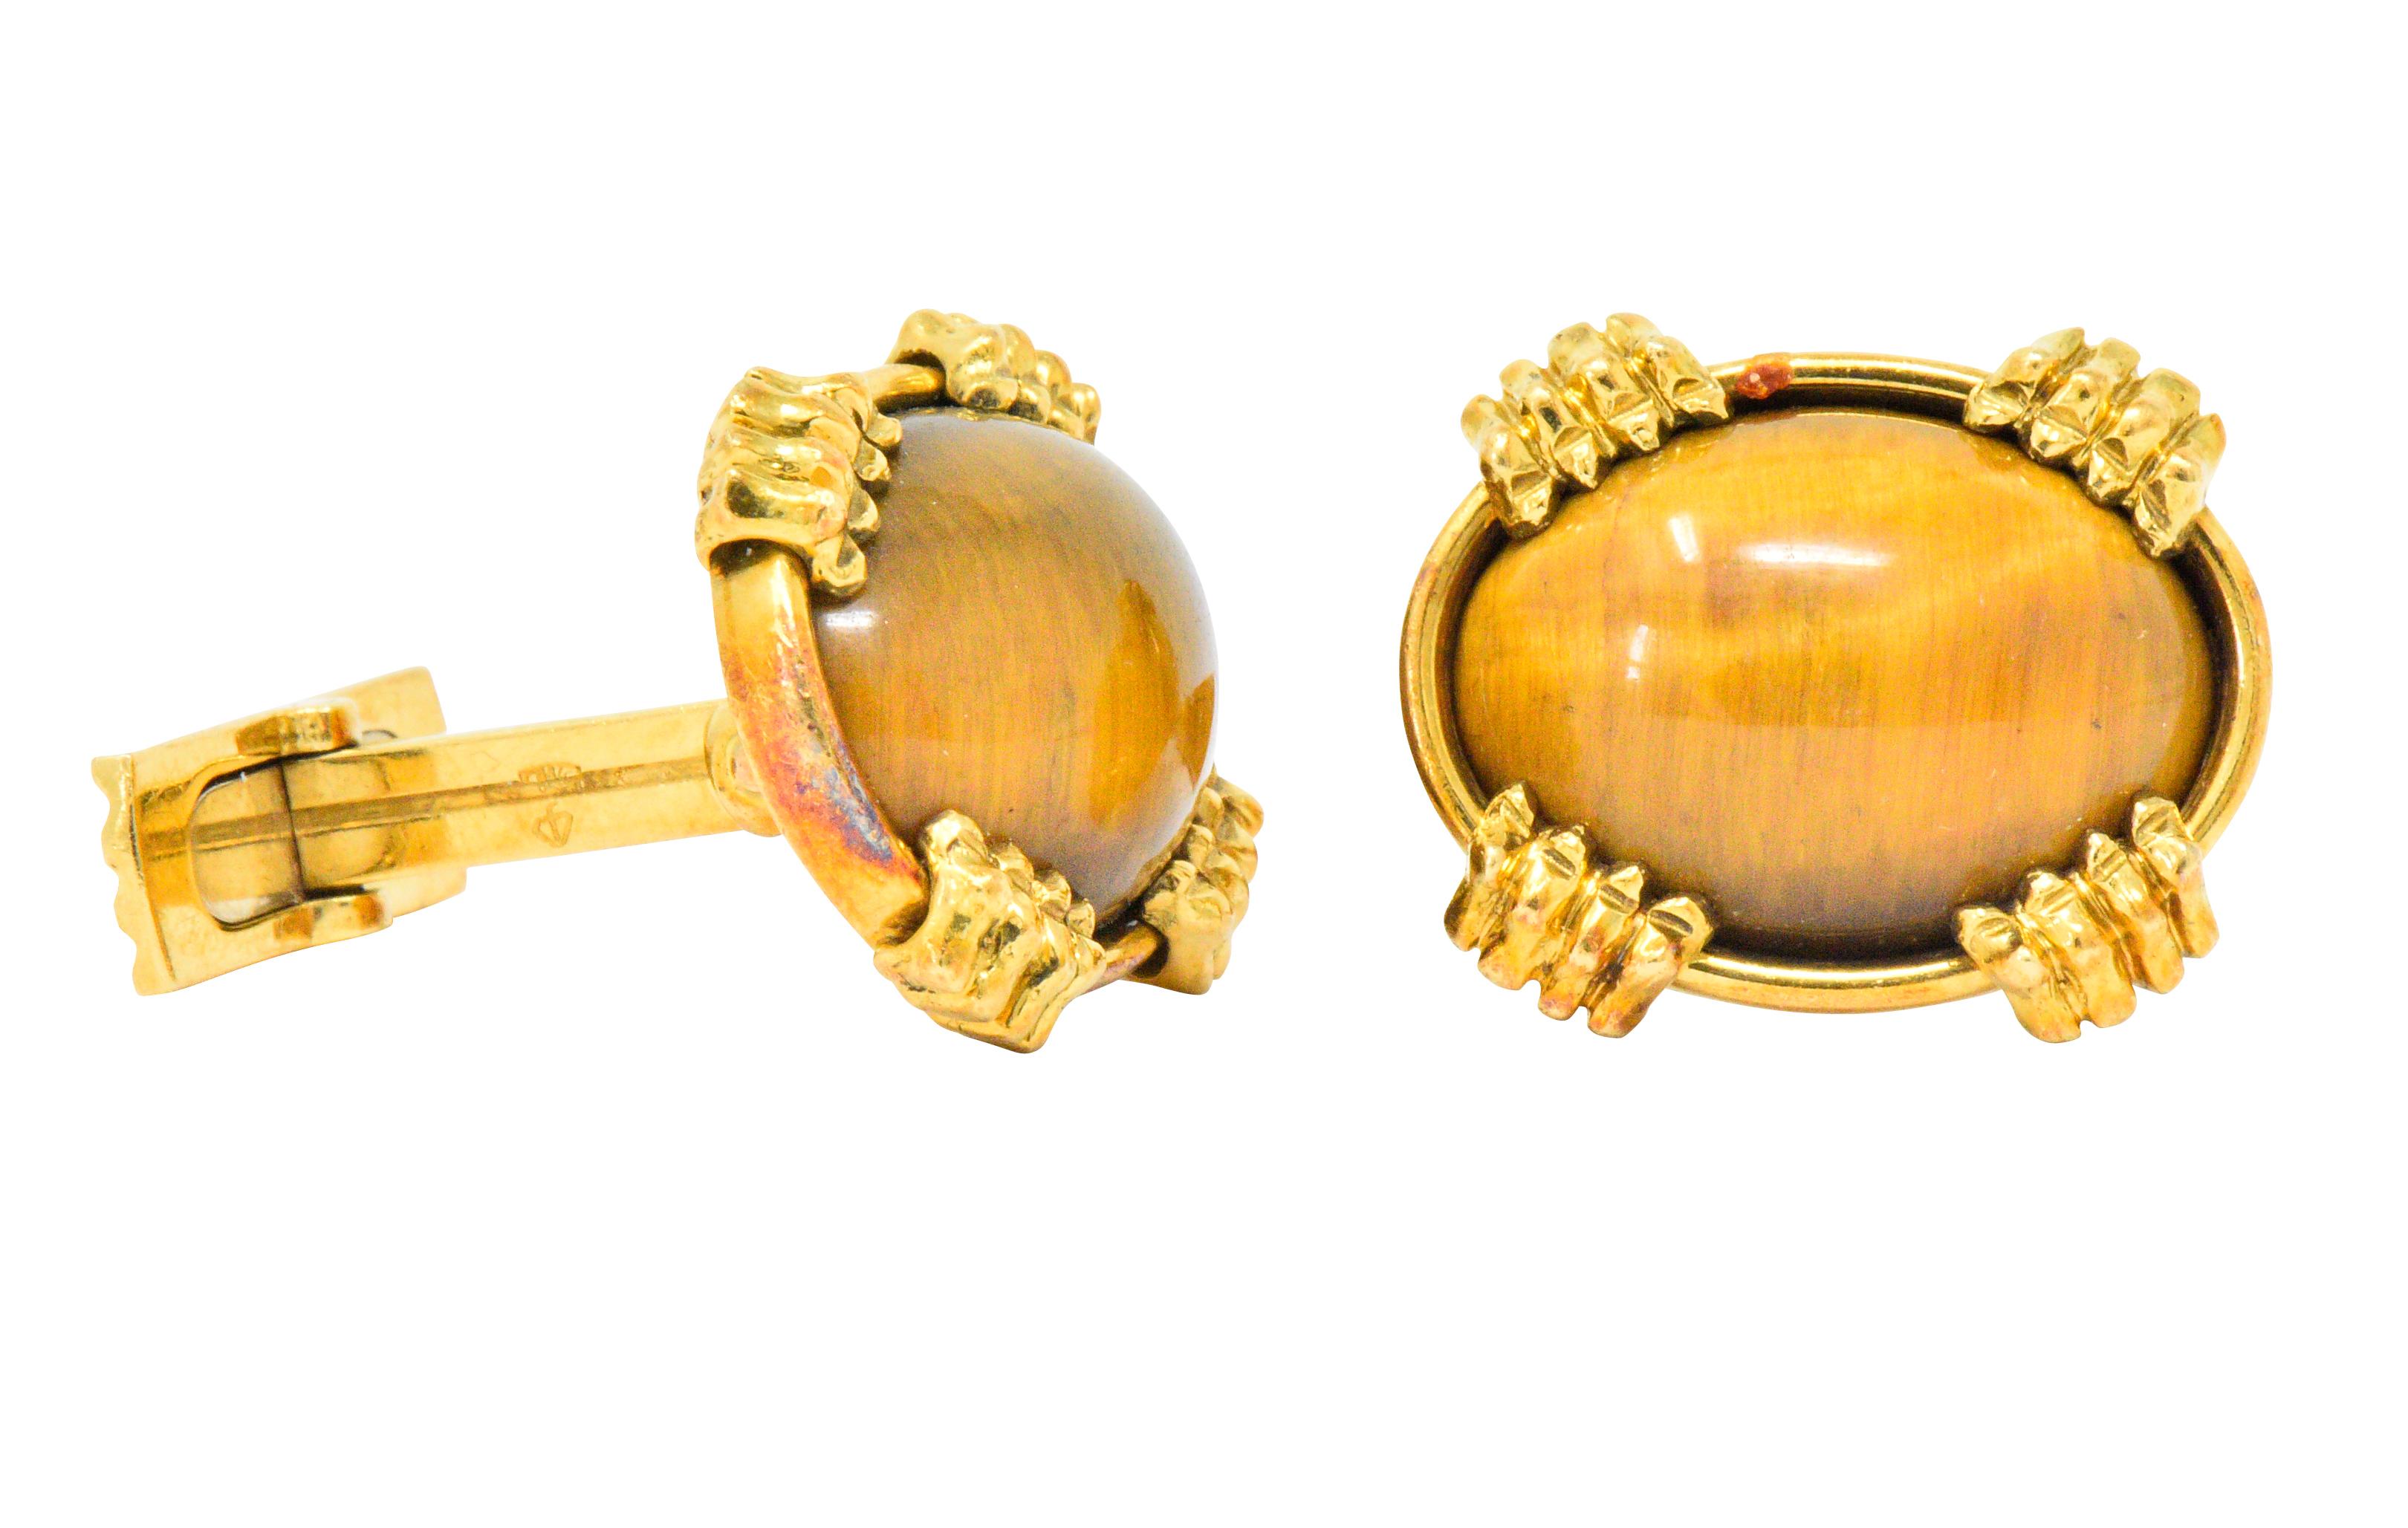 Lever style cufflinks featuring oval tiger's eye cabochon, measuring approximately 17.8 x 13.6 mm

Opaque and a well-matched gold to brown color with moderate chatoyancy

Bezel set in a polished gold surround with four stylized claw accents 

With